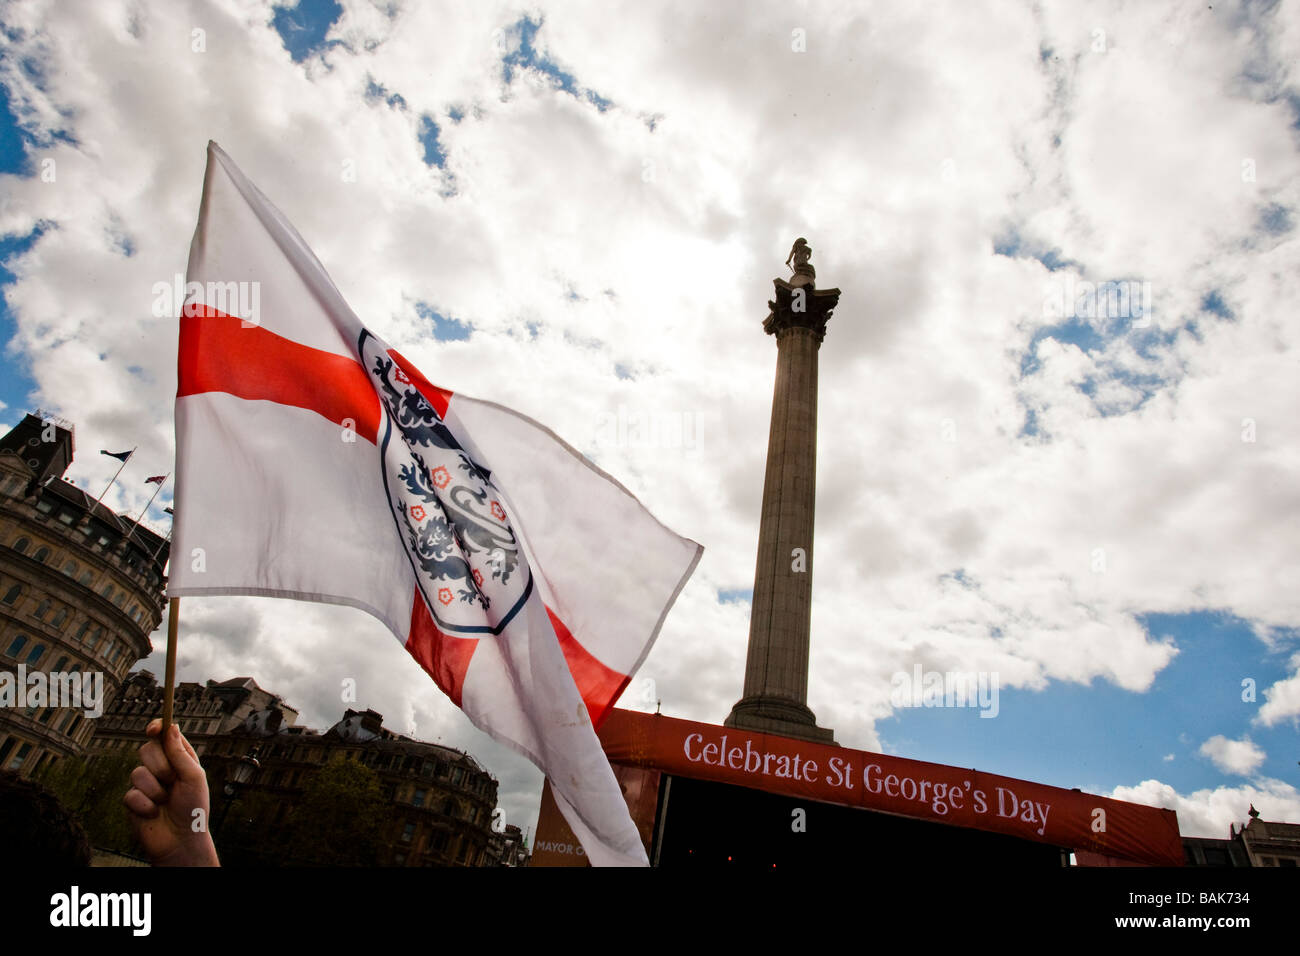 England flag being waved in Trafalgar Square during St George's Day celebrations, Nelsons Column in background. Stock Photo